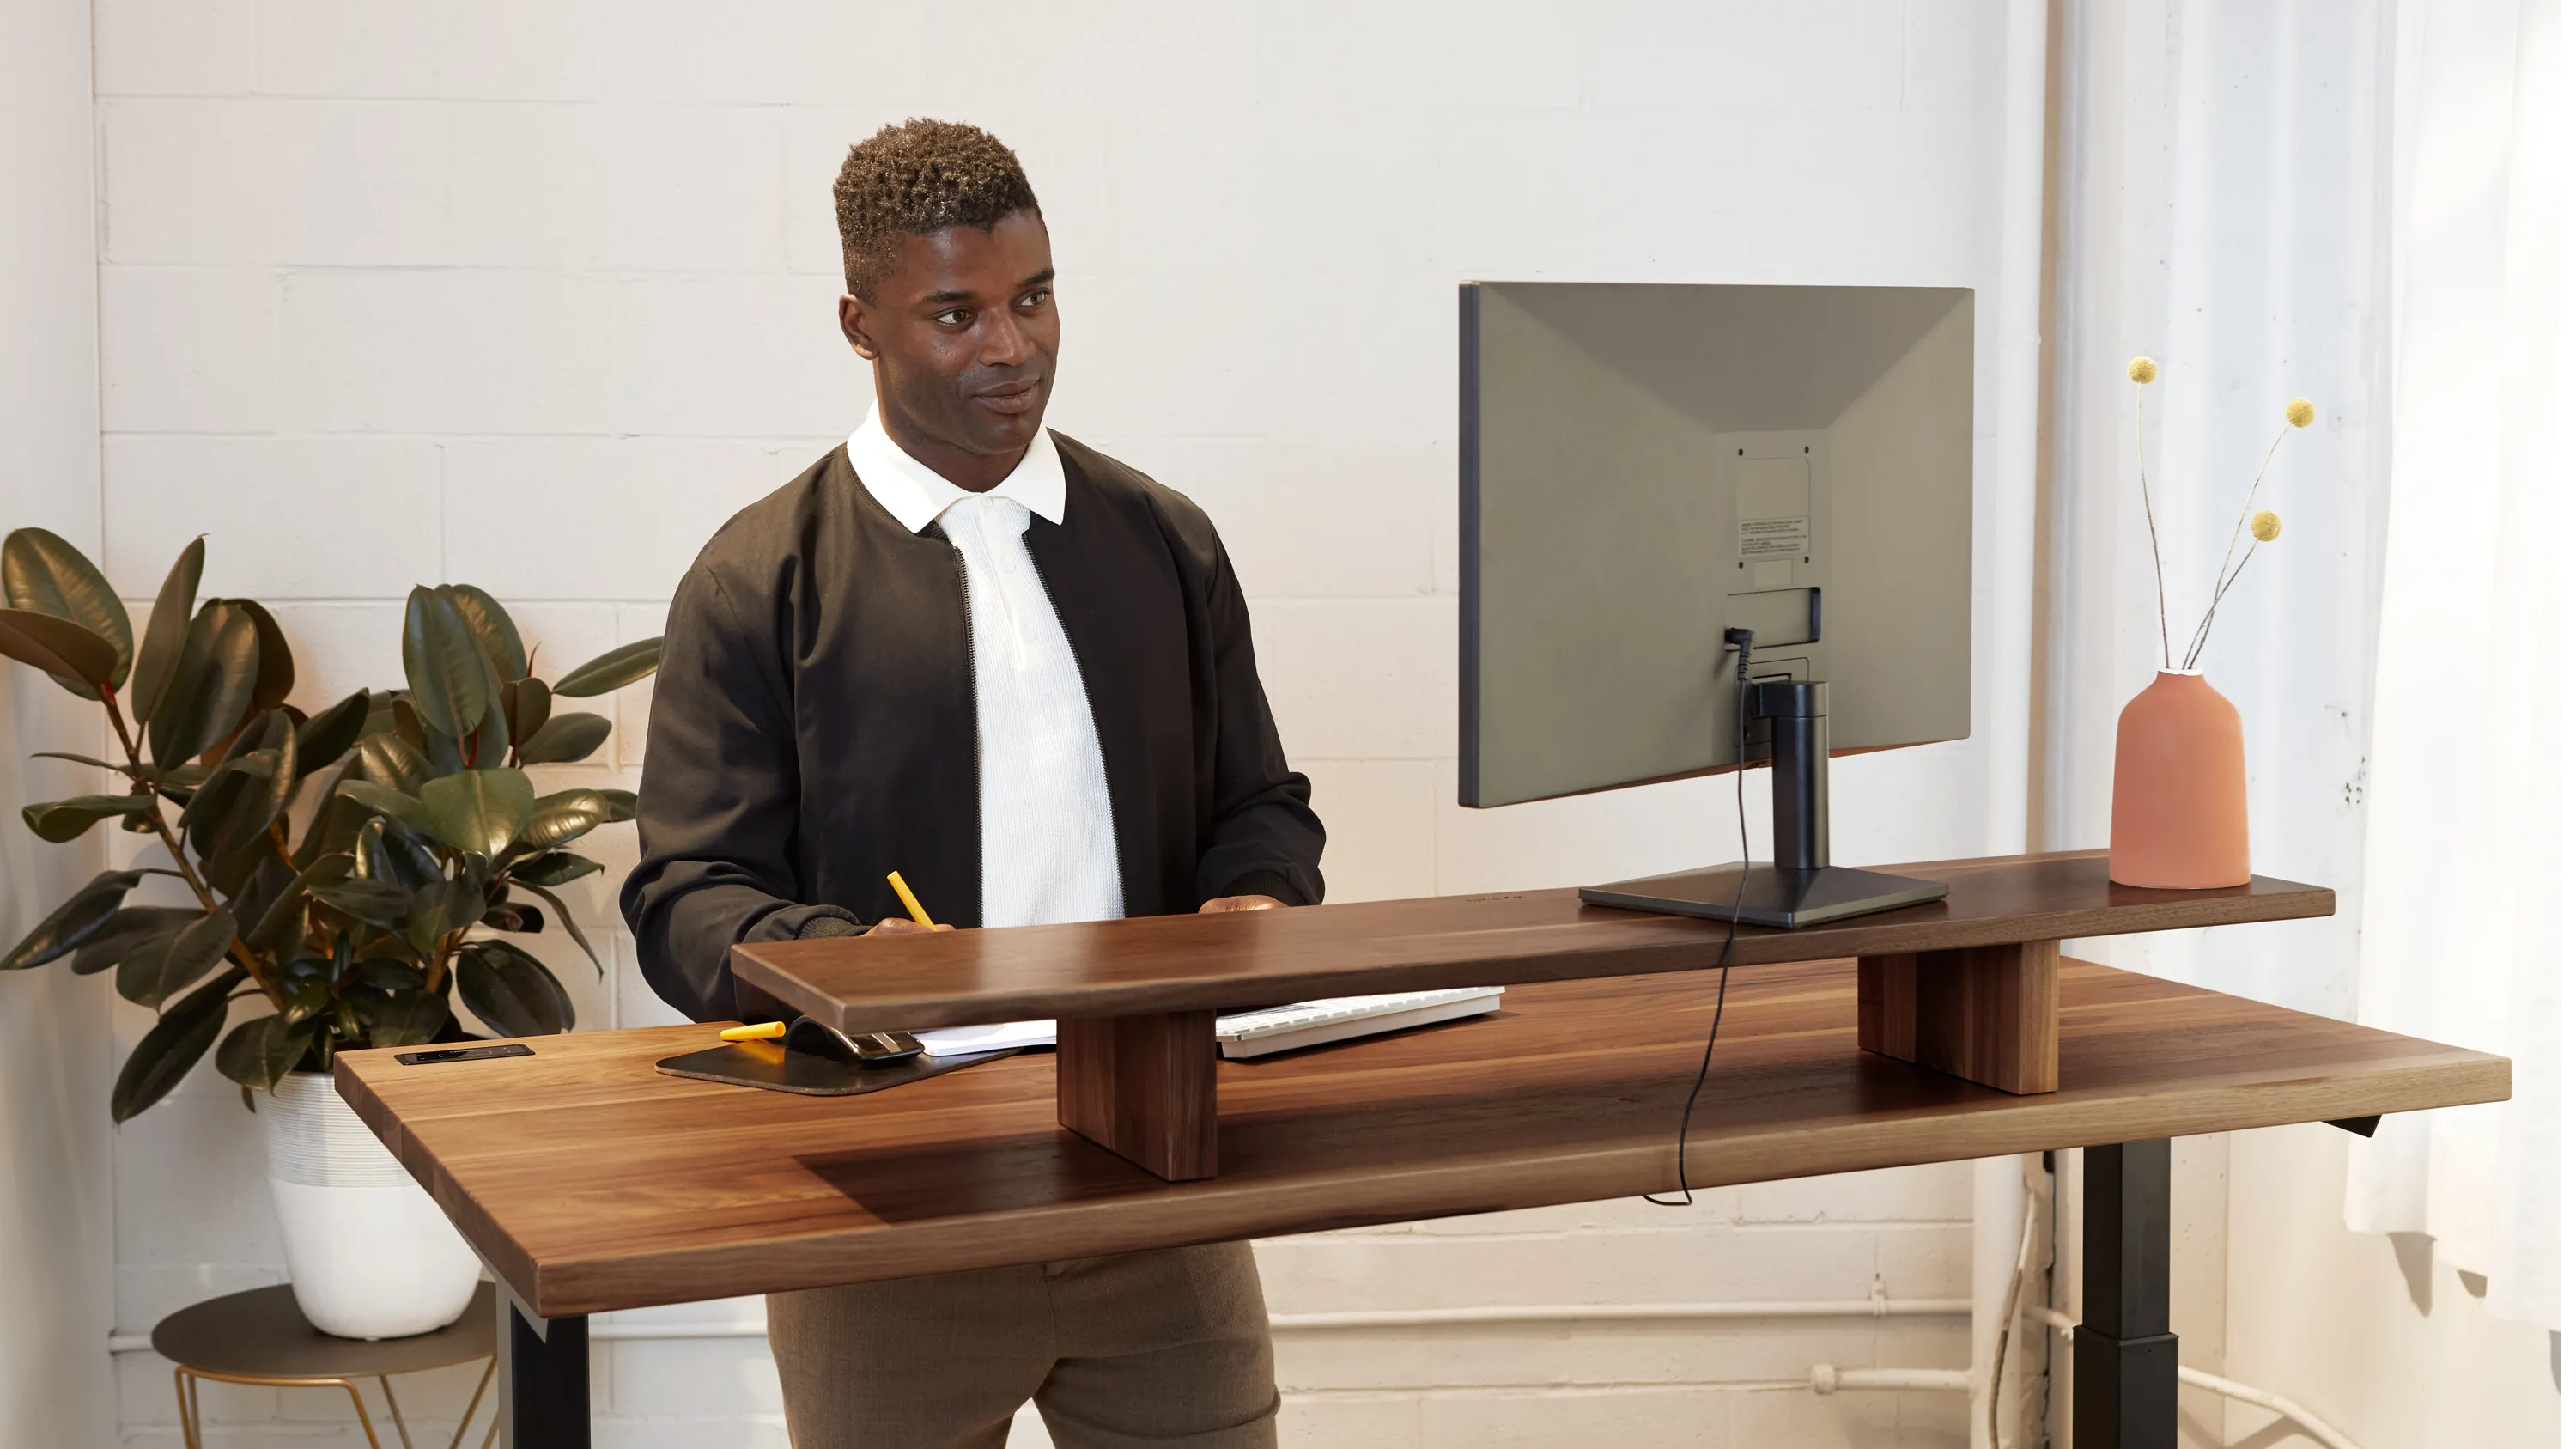 The Importance of Using Anti-Fatigue Mats with Your Standing Desk